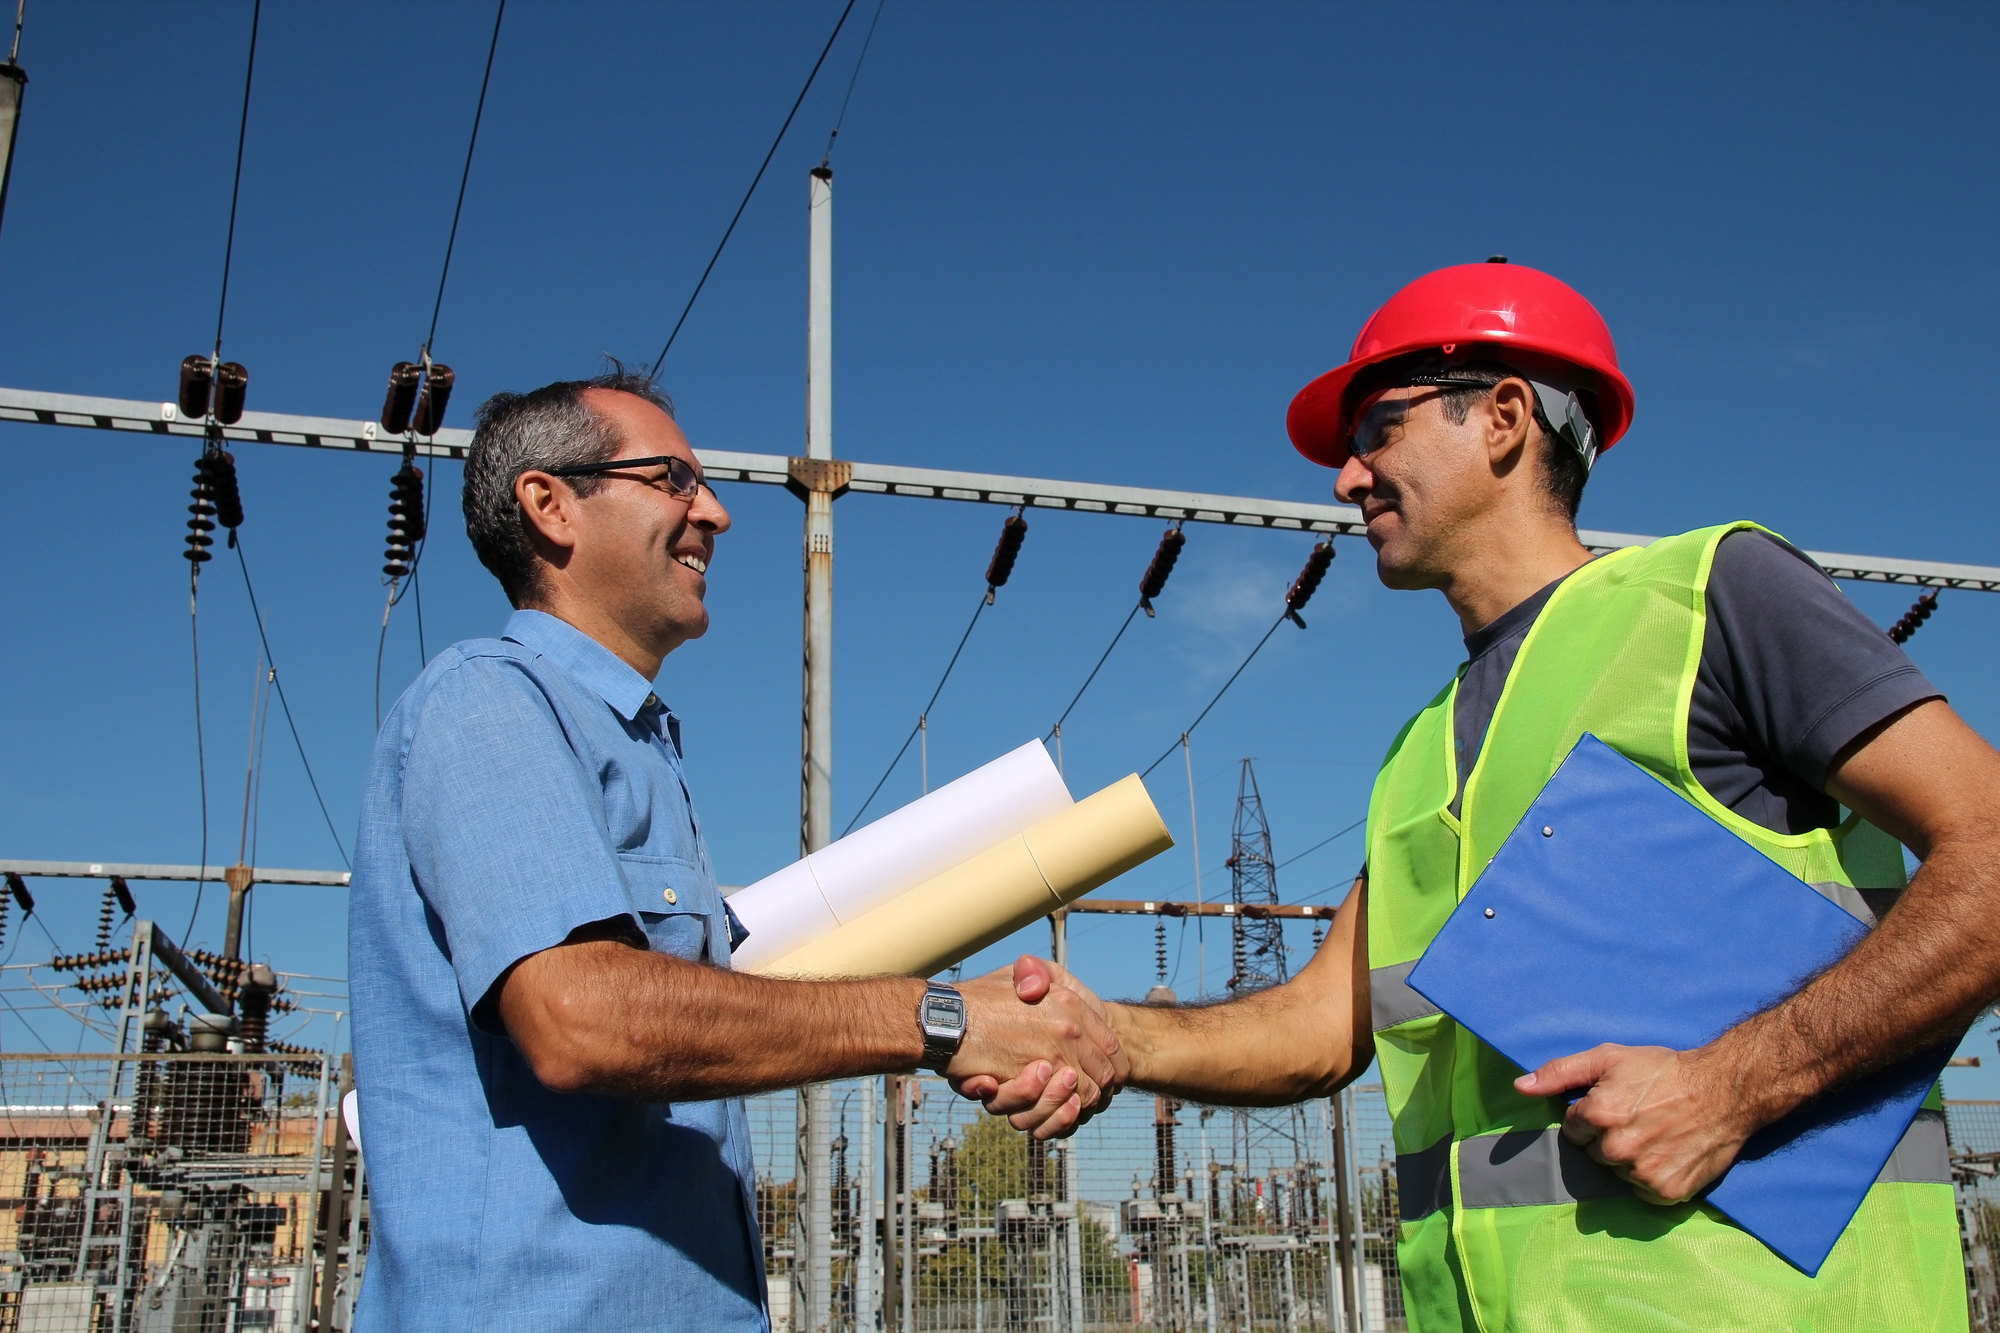 Engineer And Worker At Electrical Substation.